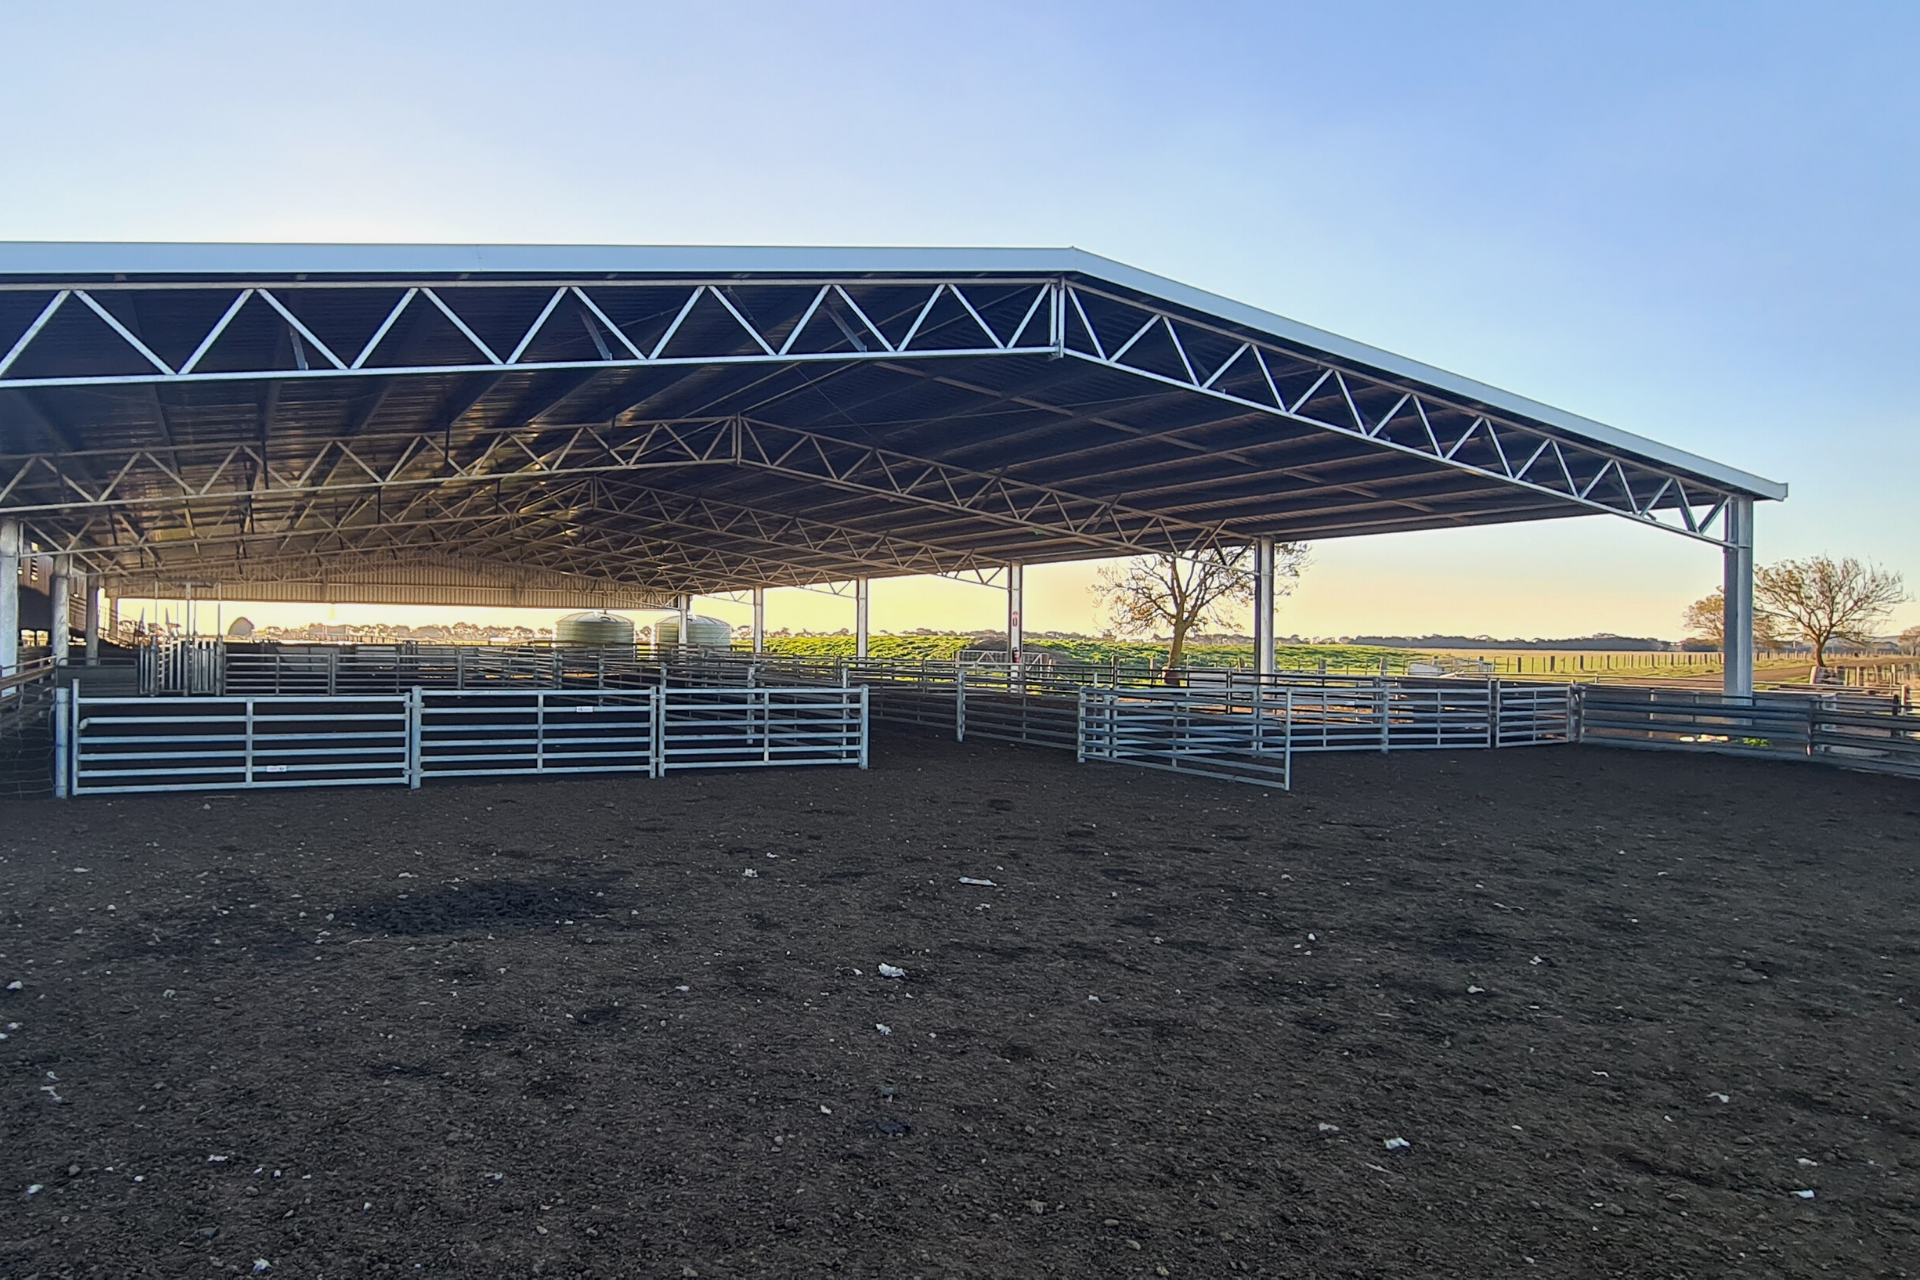 You are currently viewing 40m x 24m x 3.6m sheep yard cover